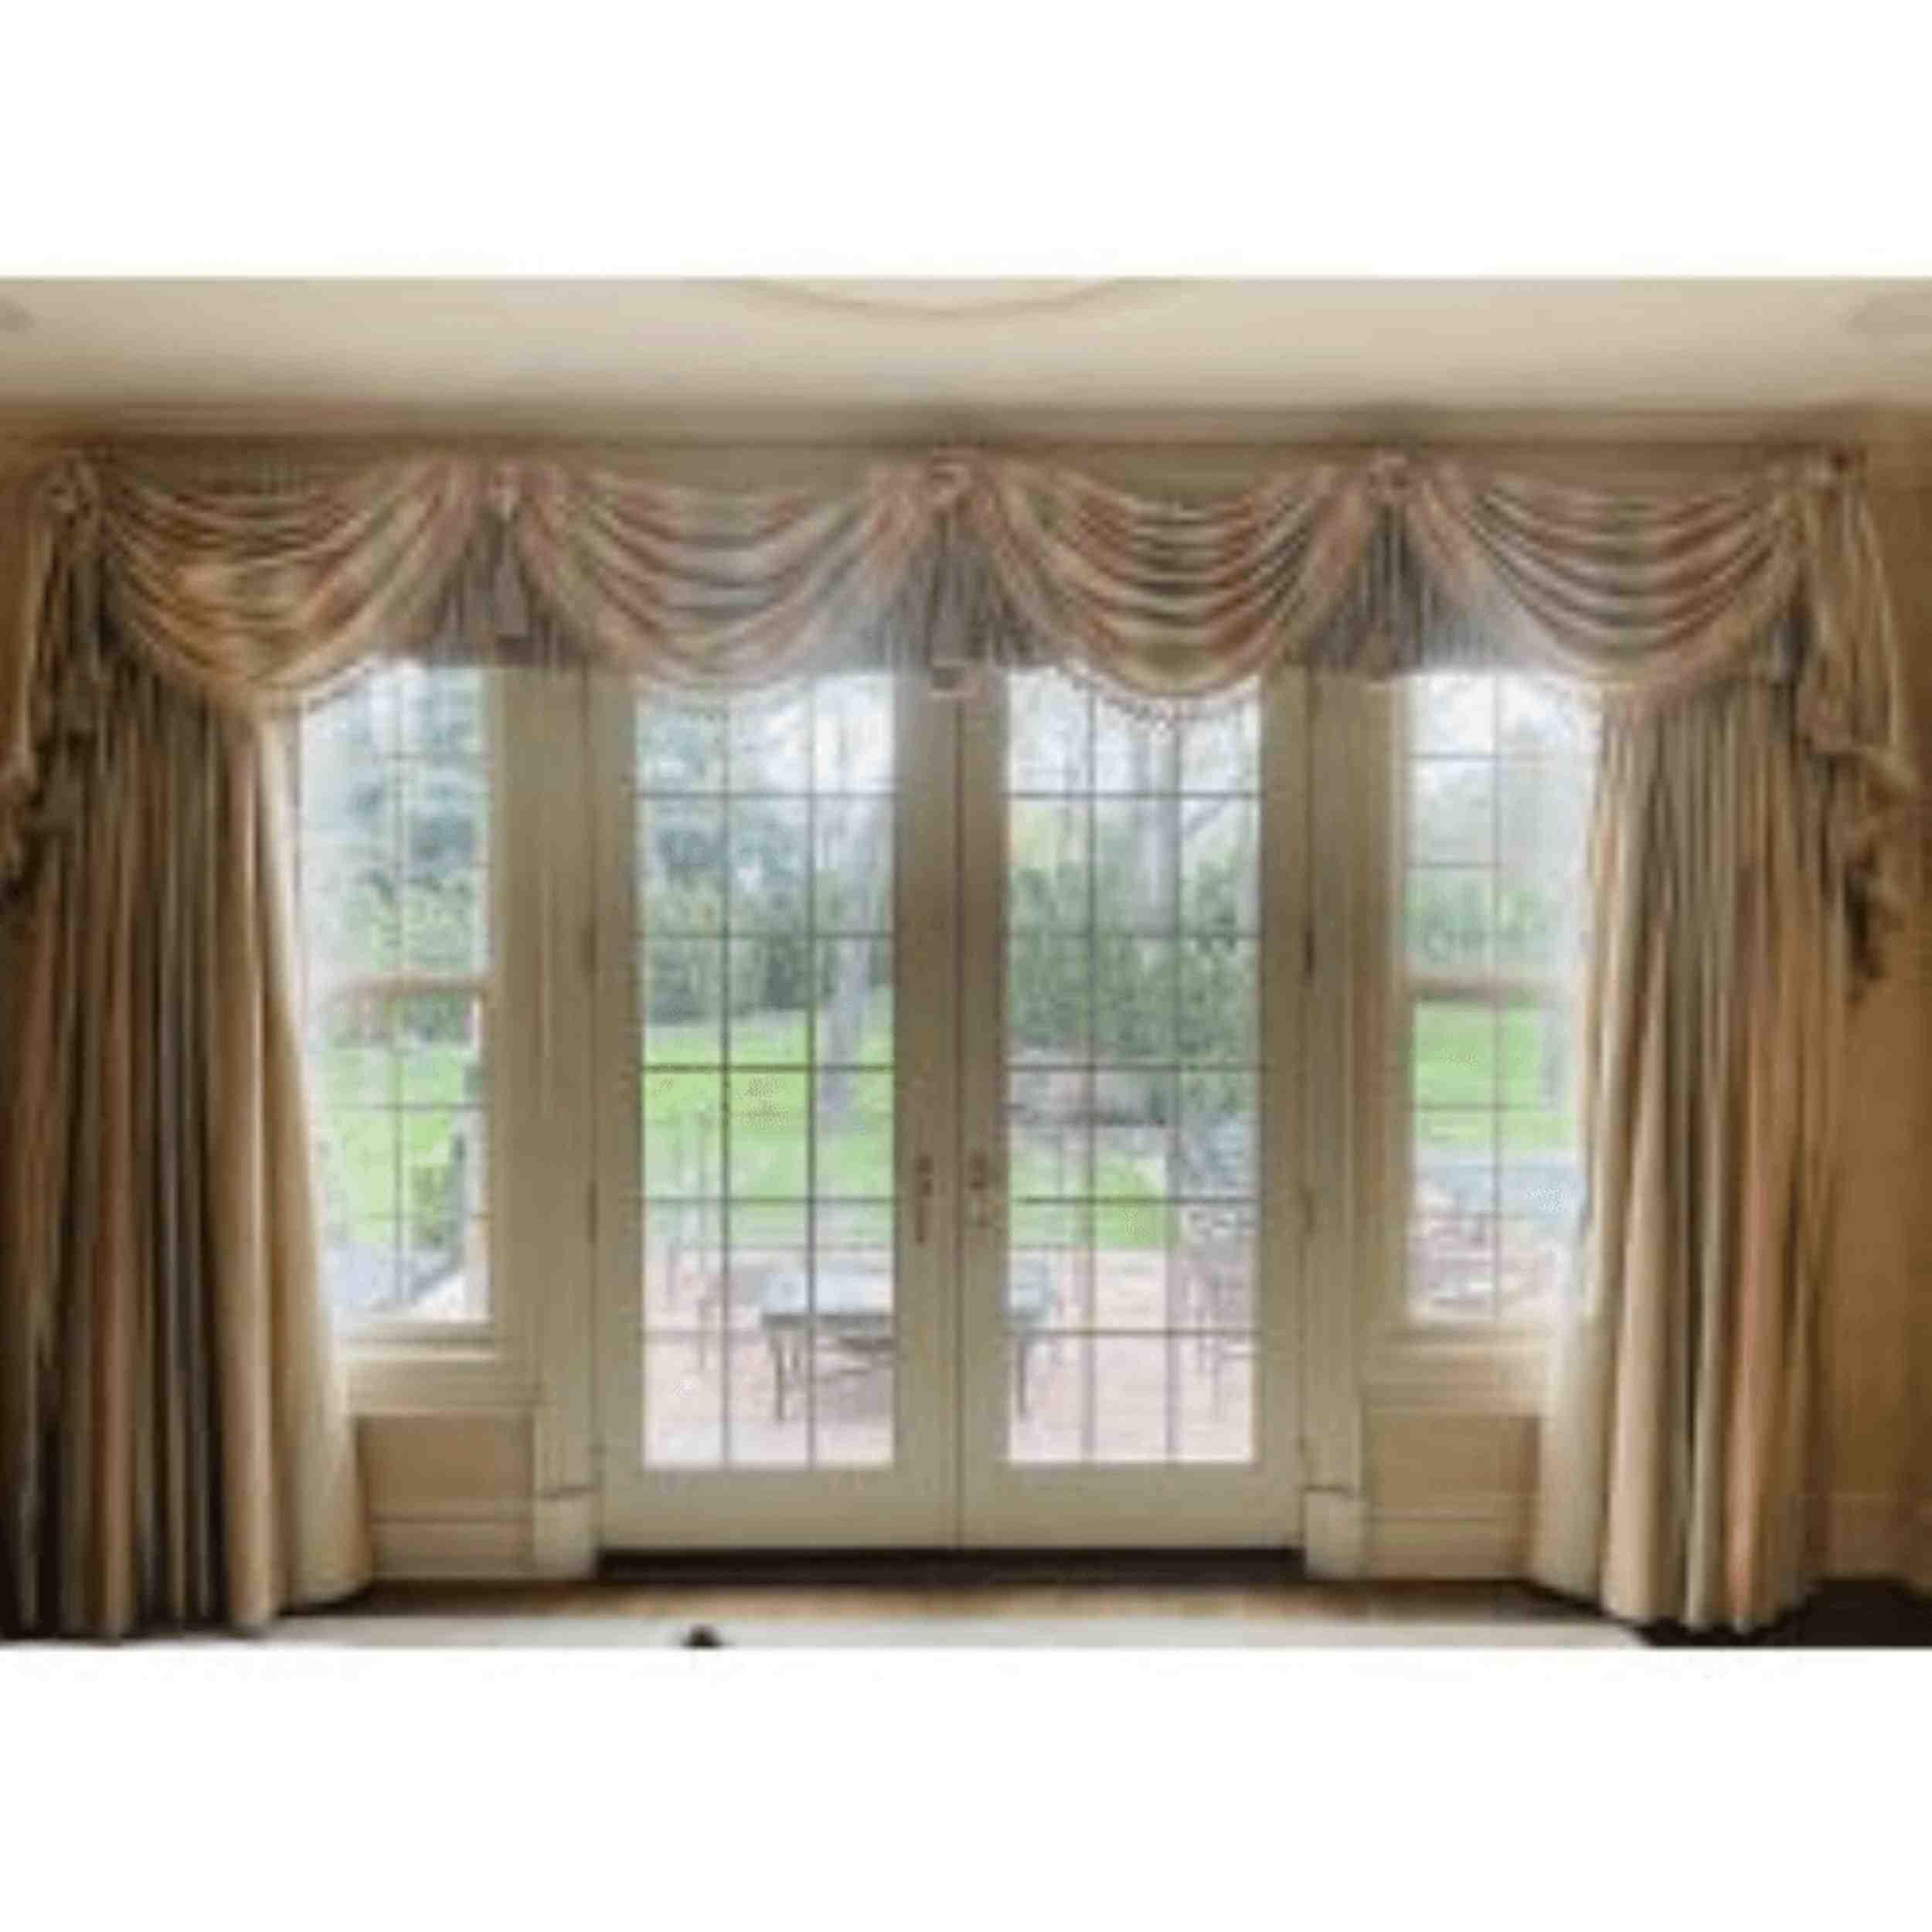 A spectacular set of Curtains or Drapery Window Treatments, Valances Removed directly from Dr Shawn Garber's home on the Gold Coast of Long Island. Part of an extensive collection seen only in our showroom.
 
2 Panels 90 in. top wide, 105 in.